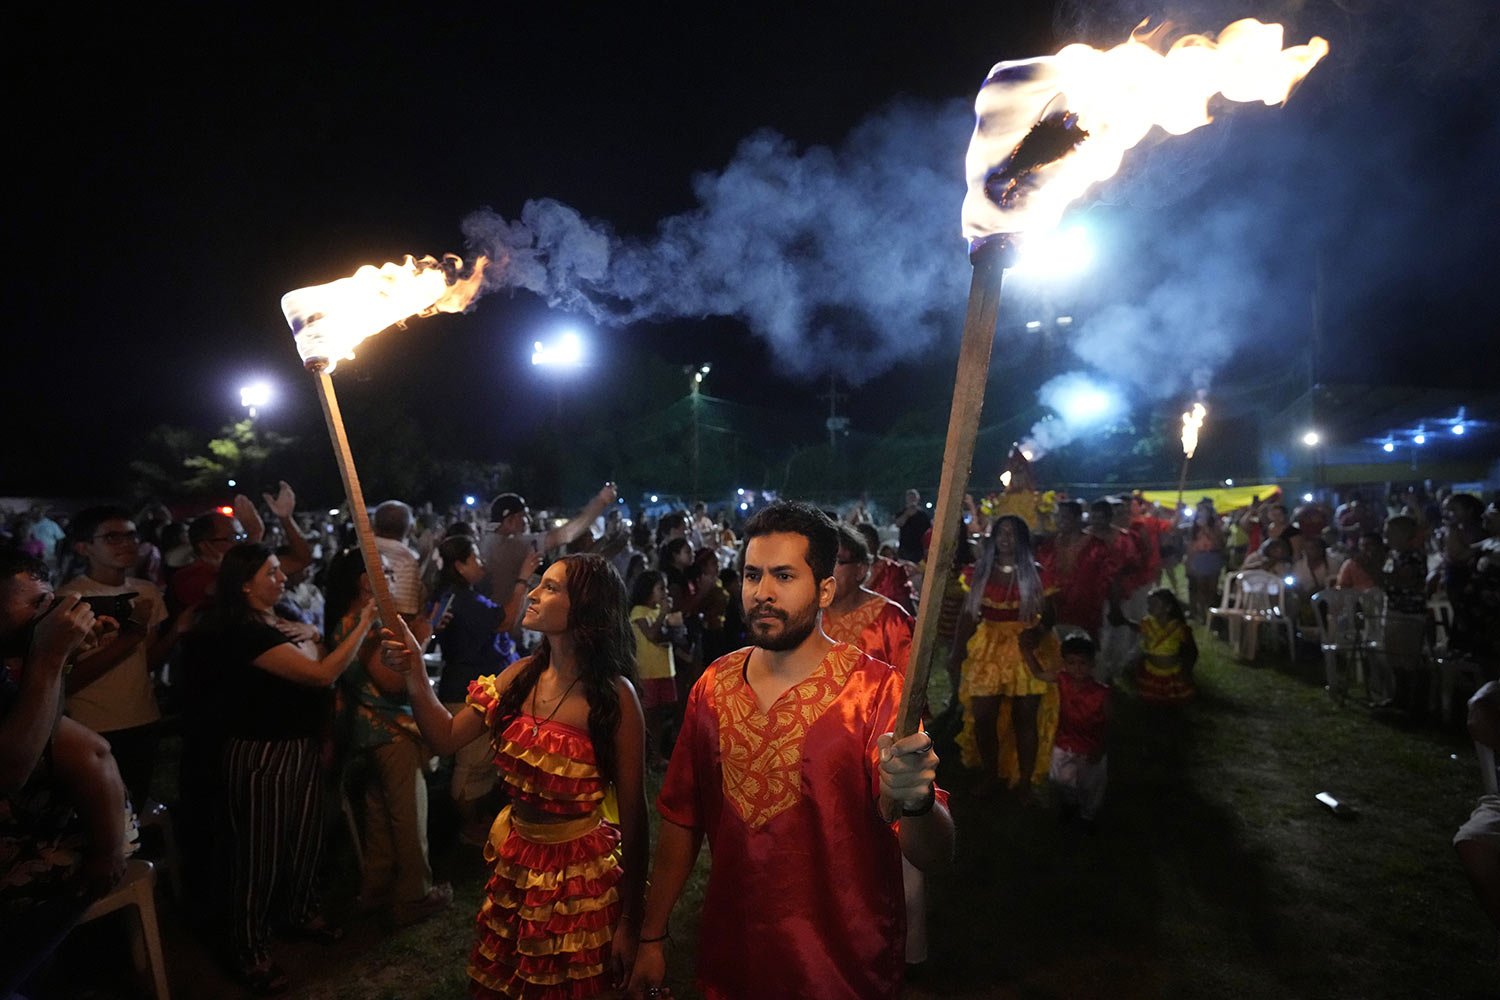  Members of the Paraguay-African cultural group Kamba Cua carry torches during an Epiphany celebration honoring Saint Balthazar, one of the Three Kings, in Fernando de la Mora, Paraguay, early Jan. 8, 2023. The procession is a tradition that keeps th